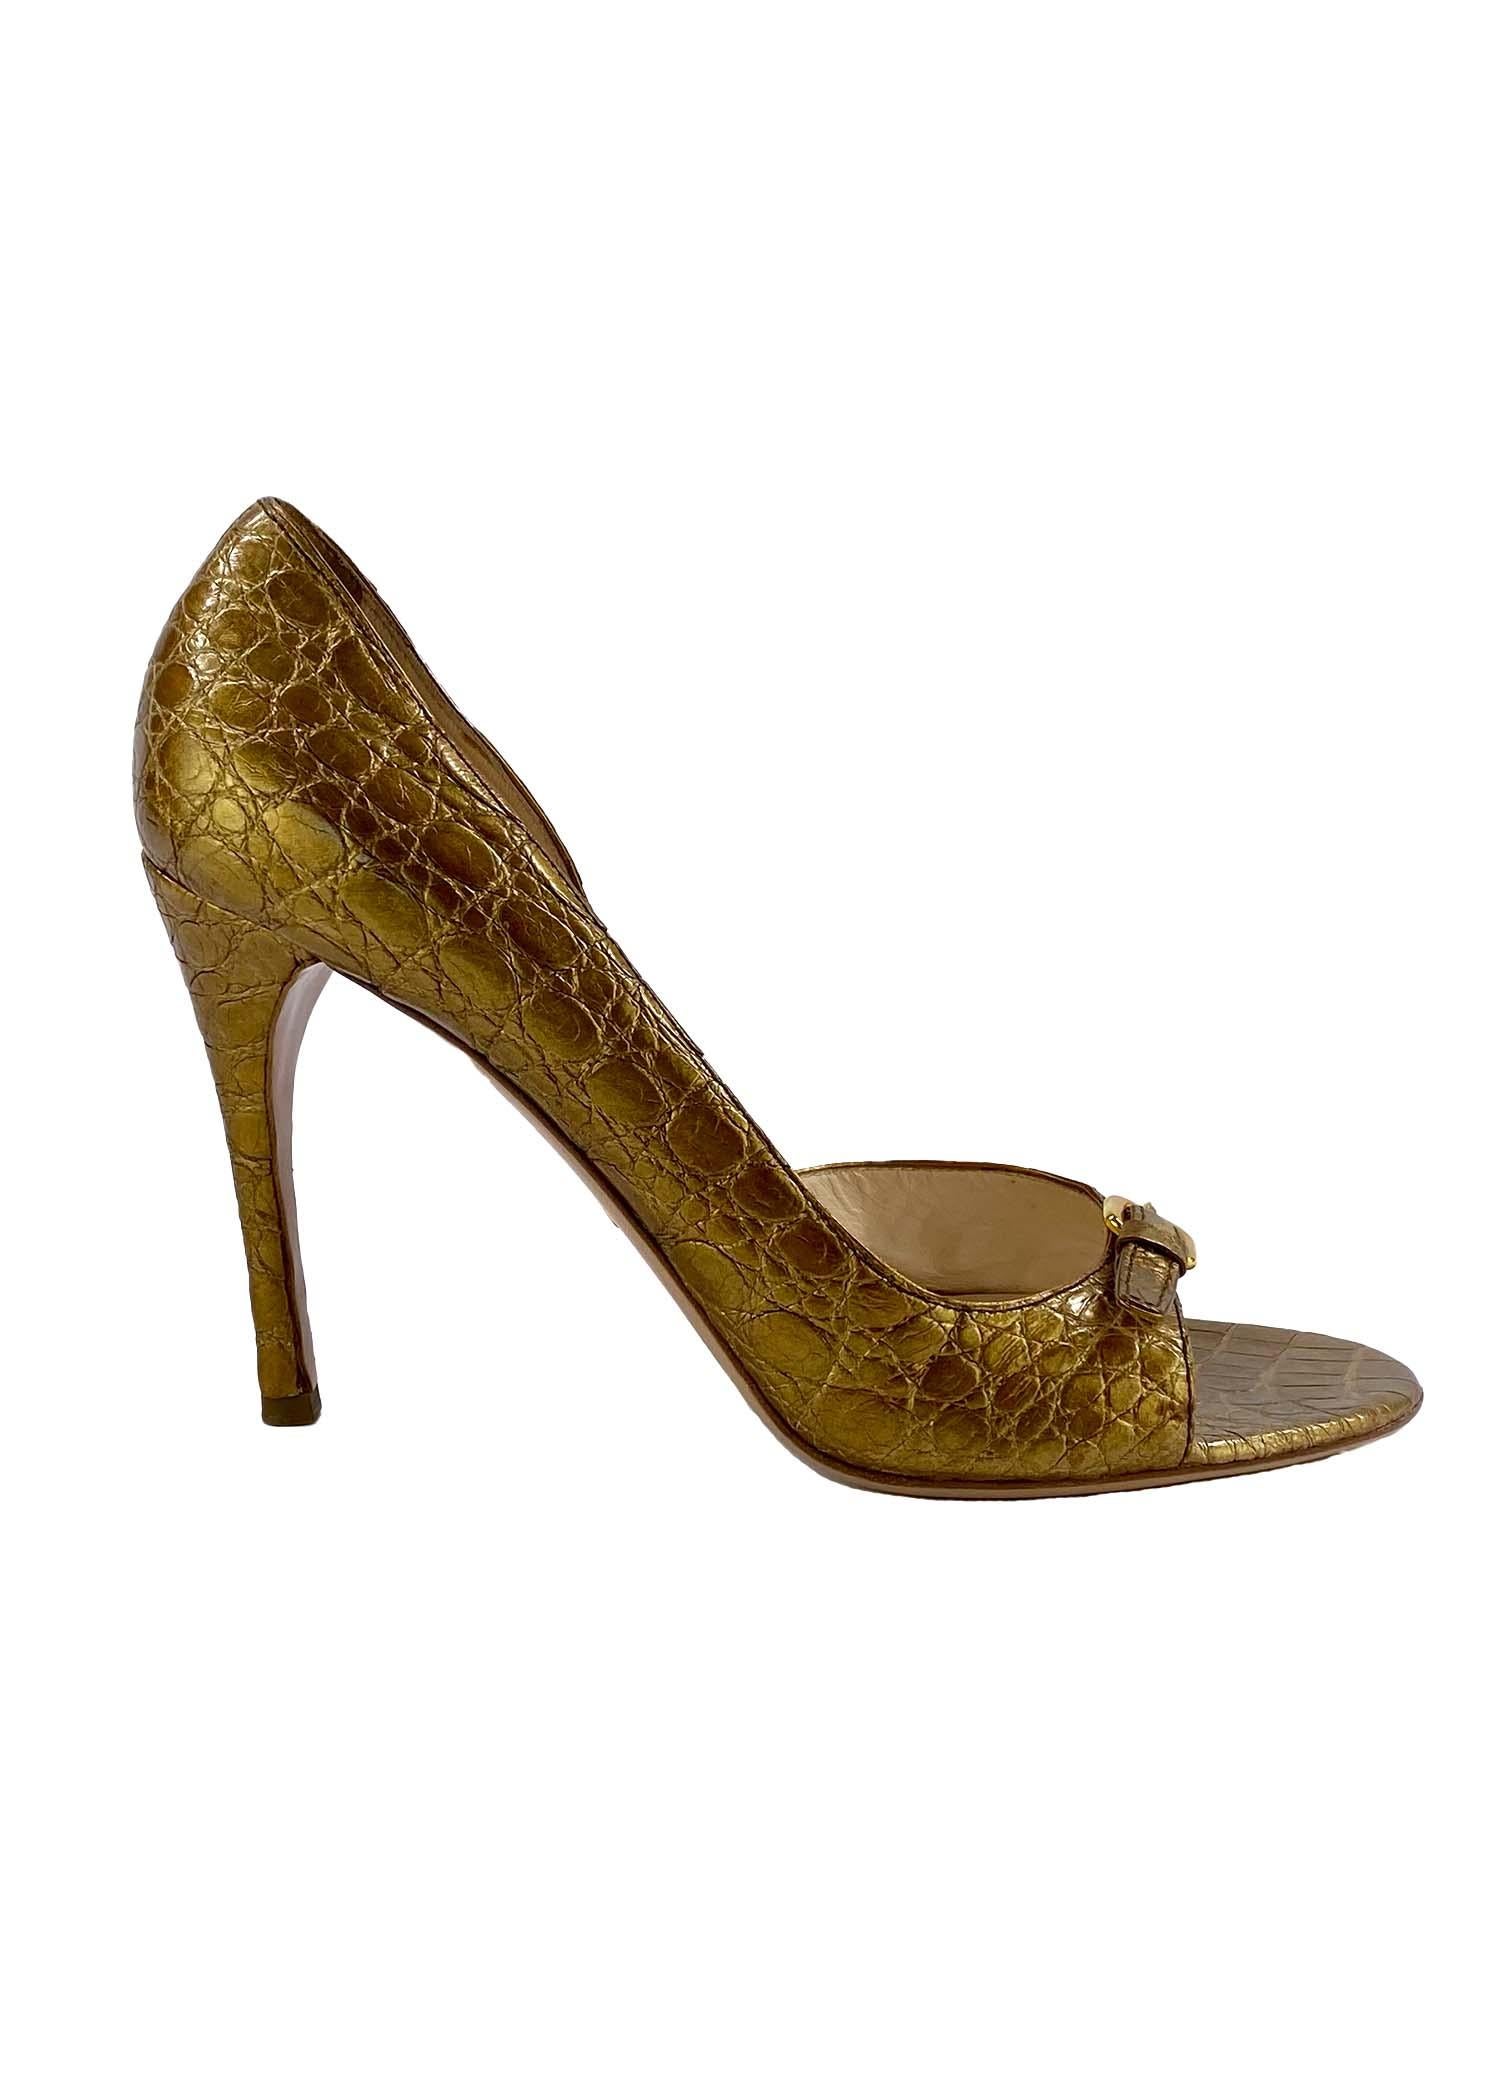 TheRealList presents: a pair of gold Prada crocodile heels created as a limited edition release to celebrate Neiman Marcus' 100th anniversary in 2007. This open-toe heel features a petite gold buckle about the toe. These heels are the perfect